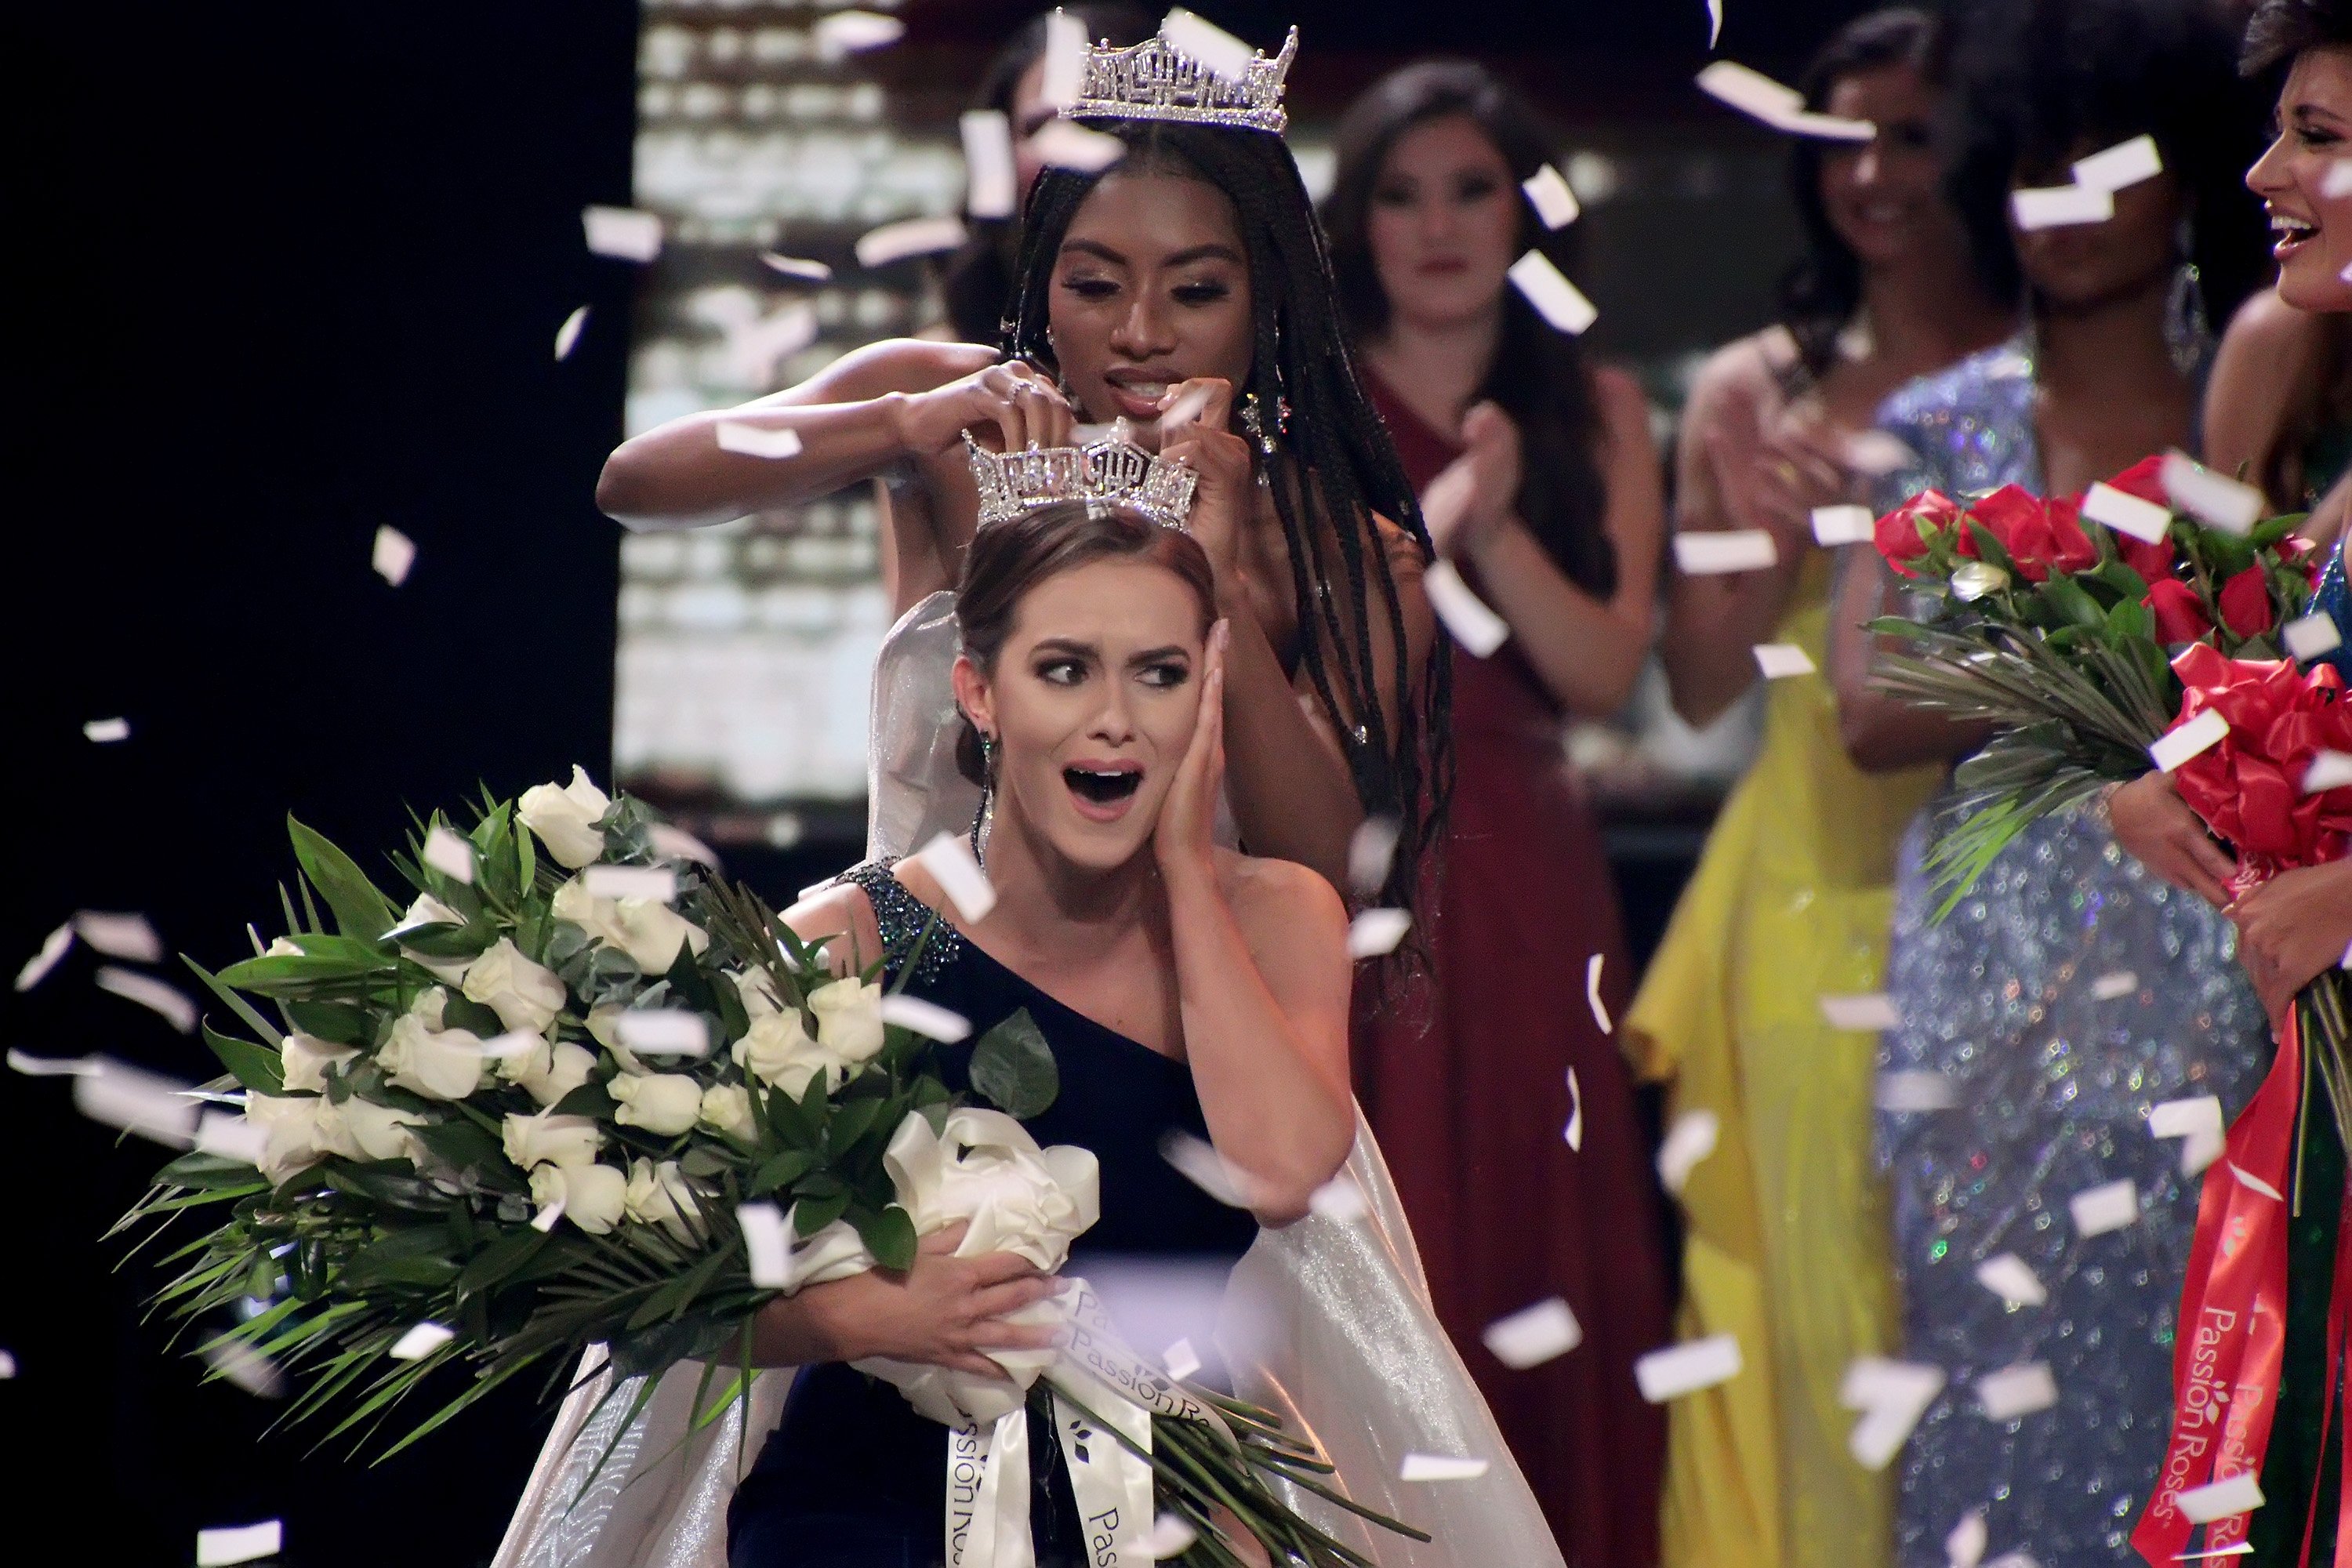 Miss America 2019 Nia Franklin crowns Miss Virginia, Camille Schrier, as Miss America 2020